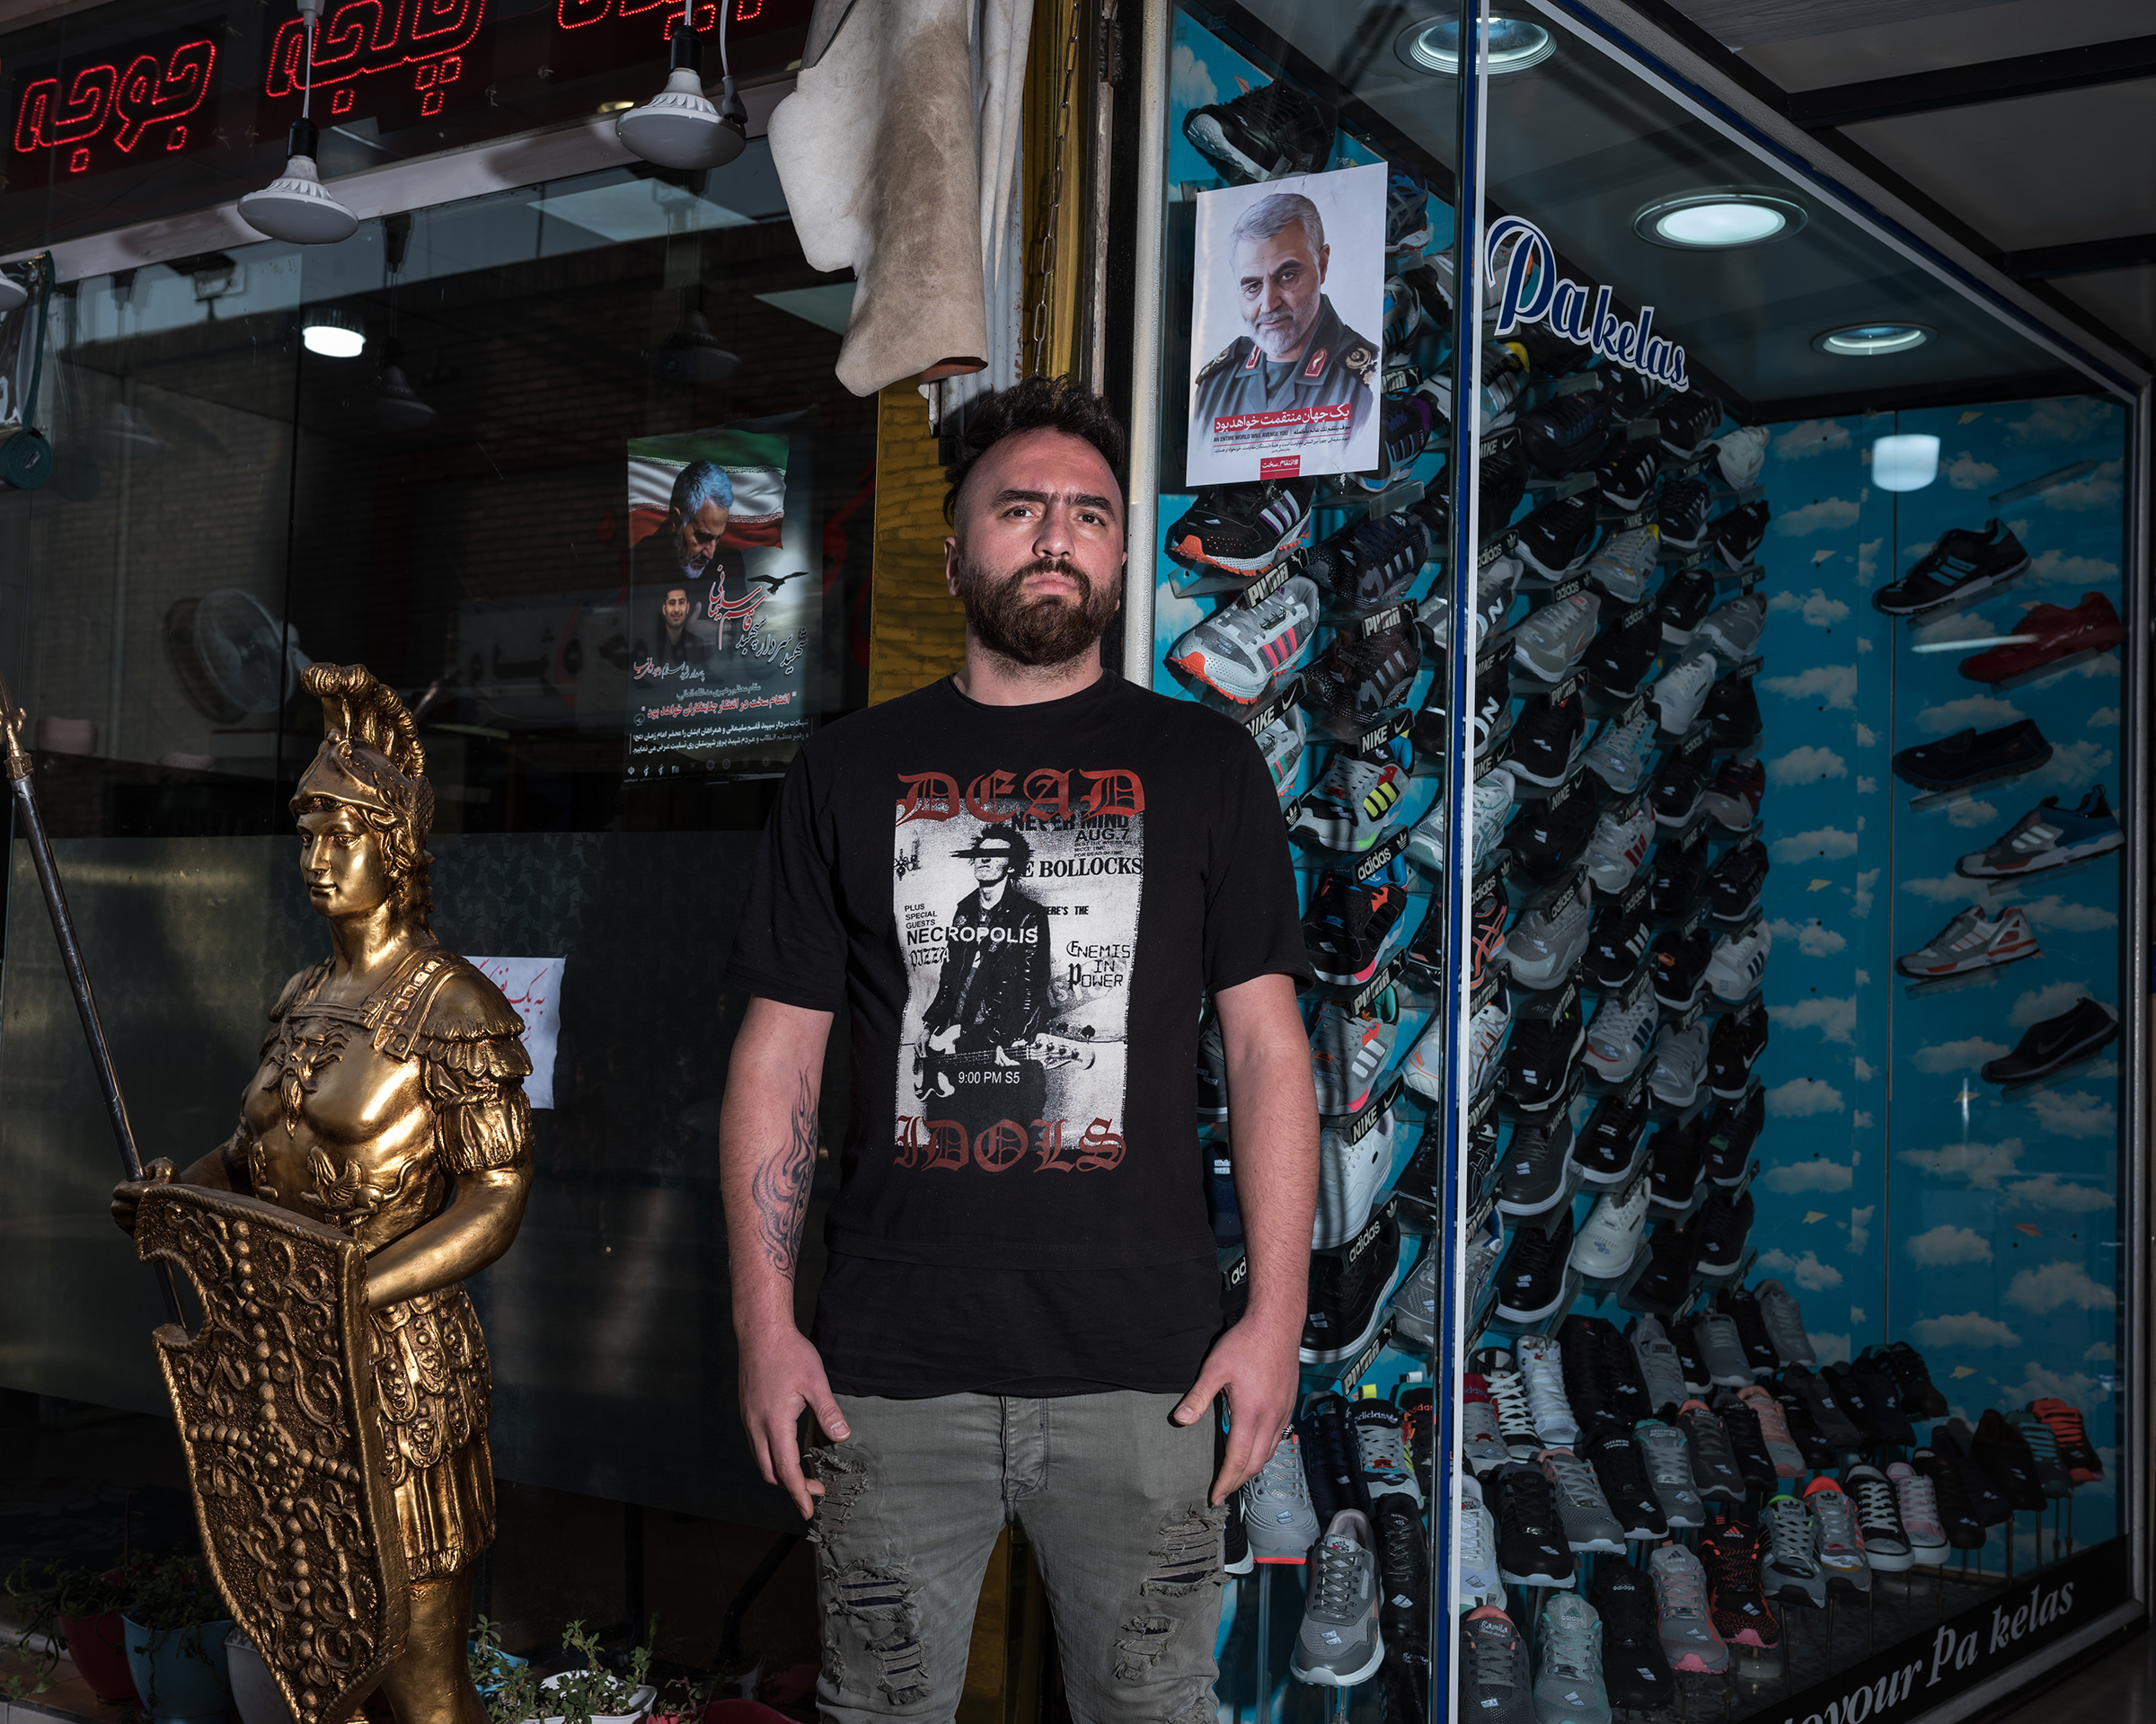 Ali, 29, sells shoes near the shrine to Shah Abdol Azim in Tehran. He hung a poster of Soleimani "out of respect for what he did for Iran." (Newsha Tavakolian—Magnum Photos for TIME)